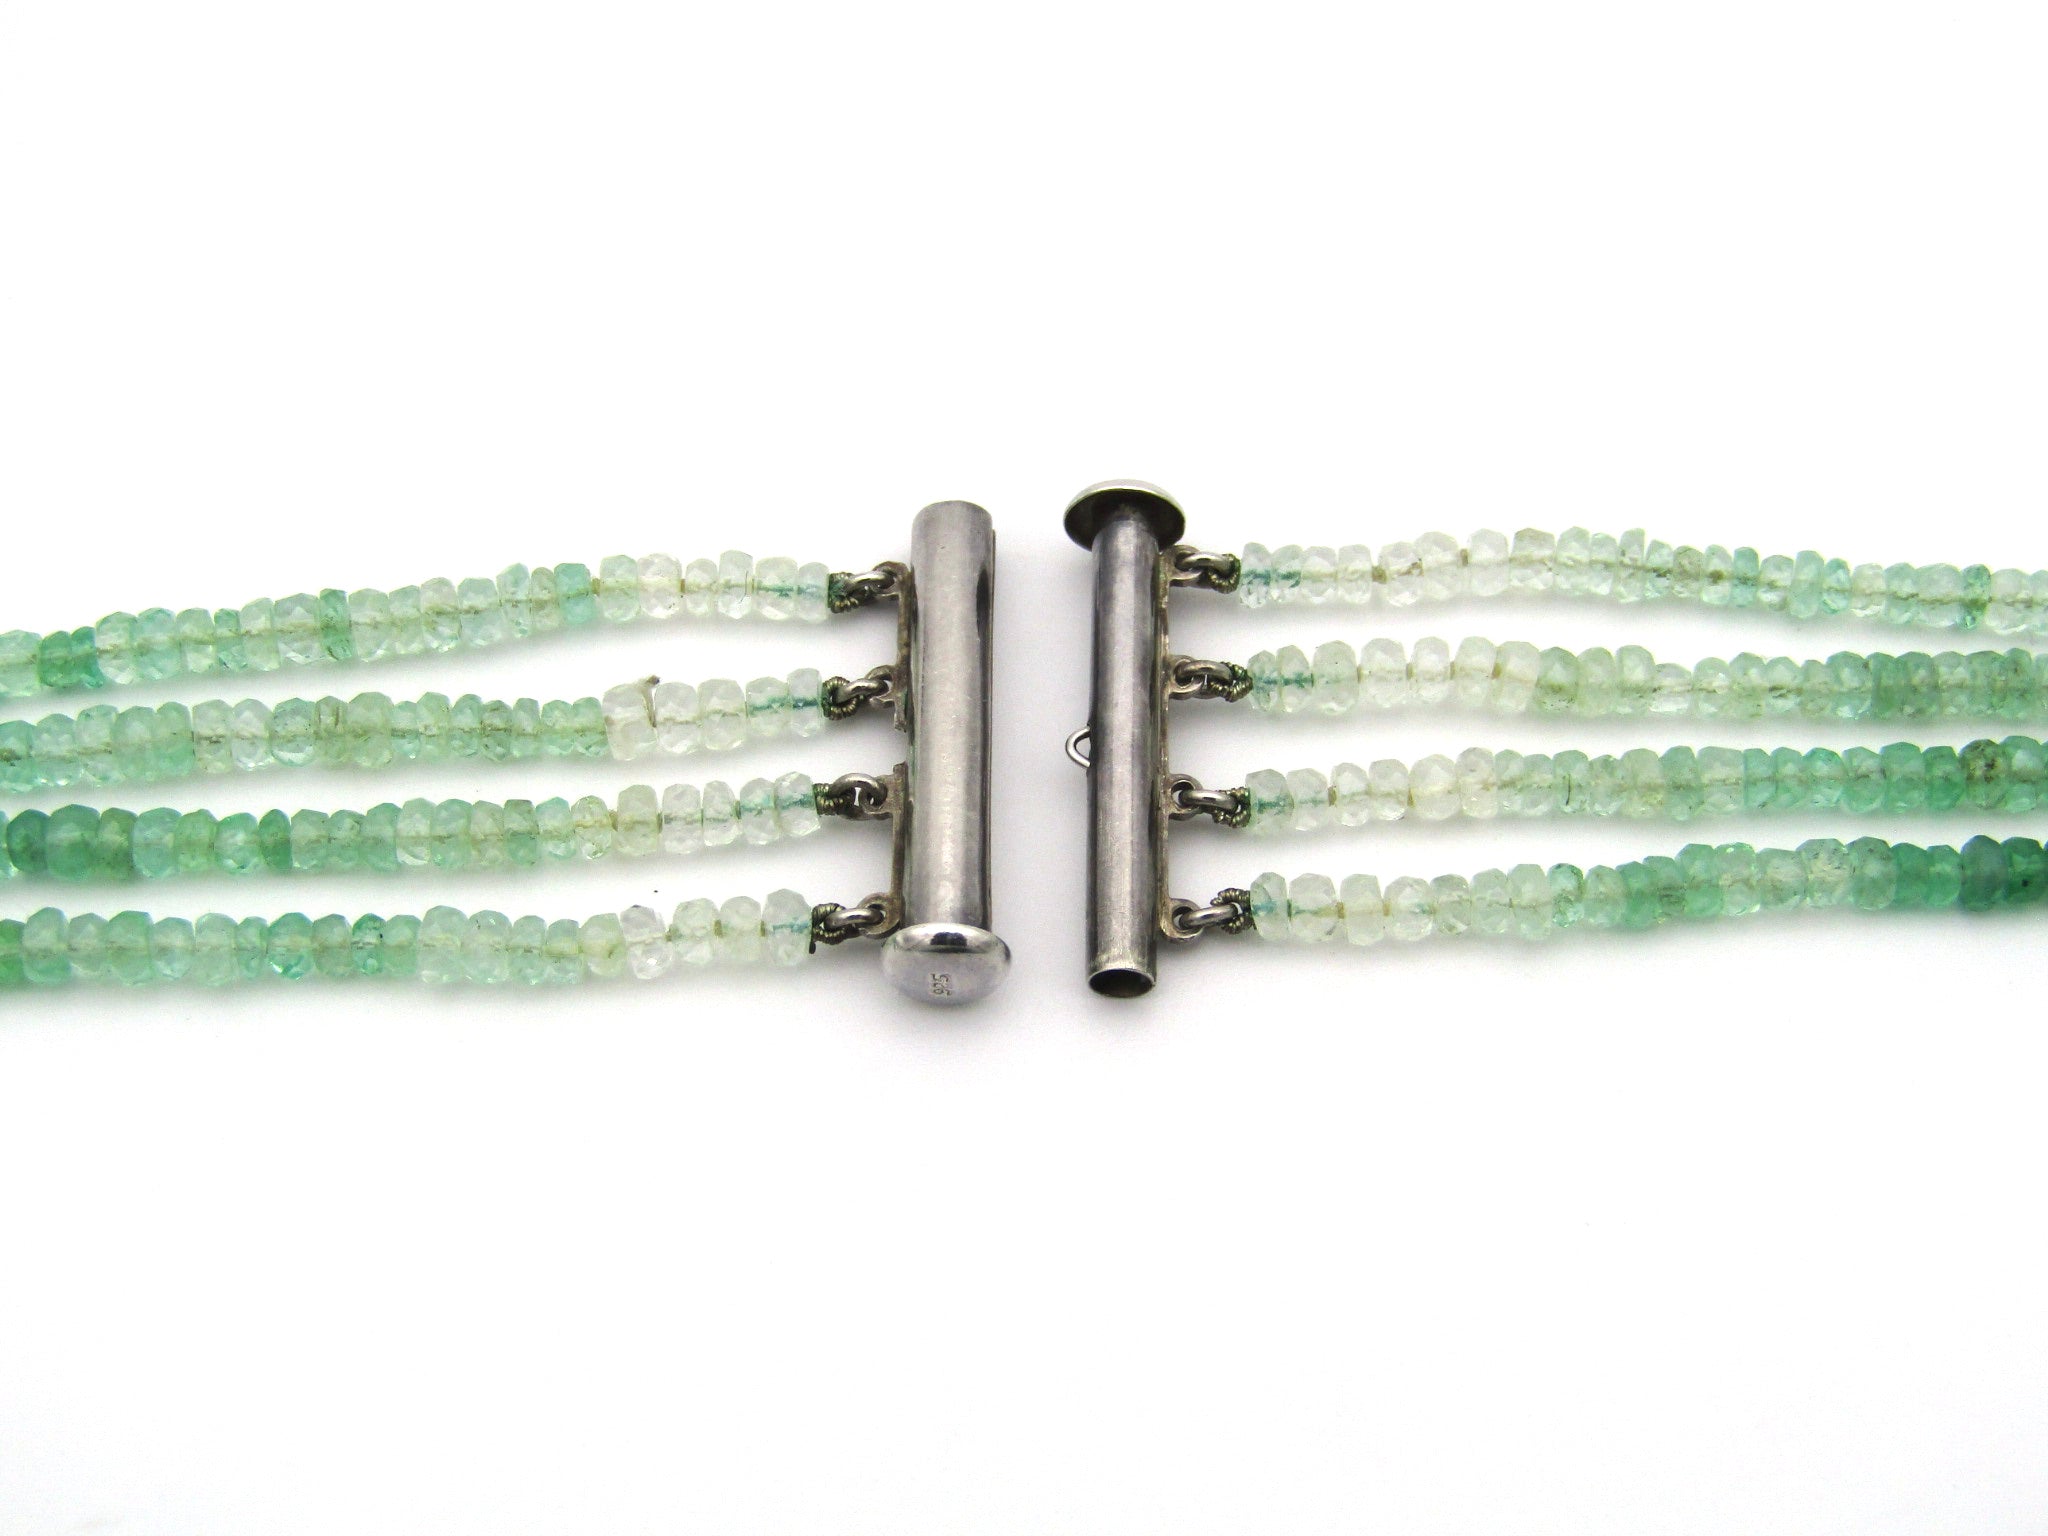 Silver 4-strand emerald and green beryl necklace.